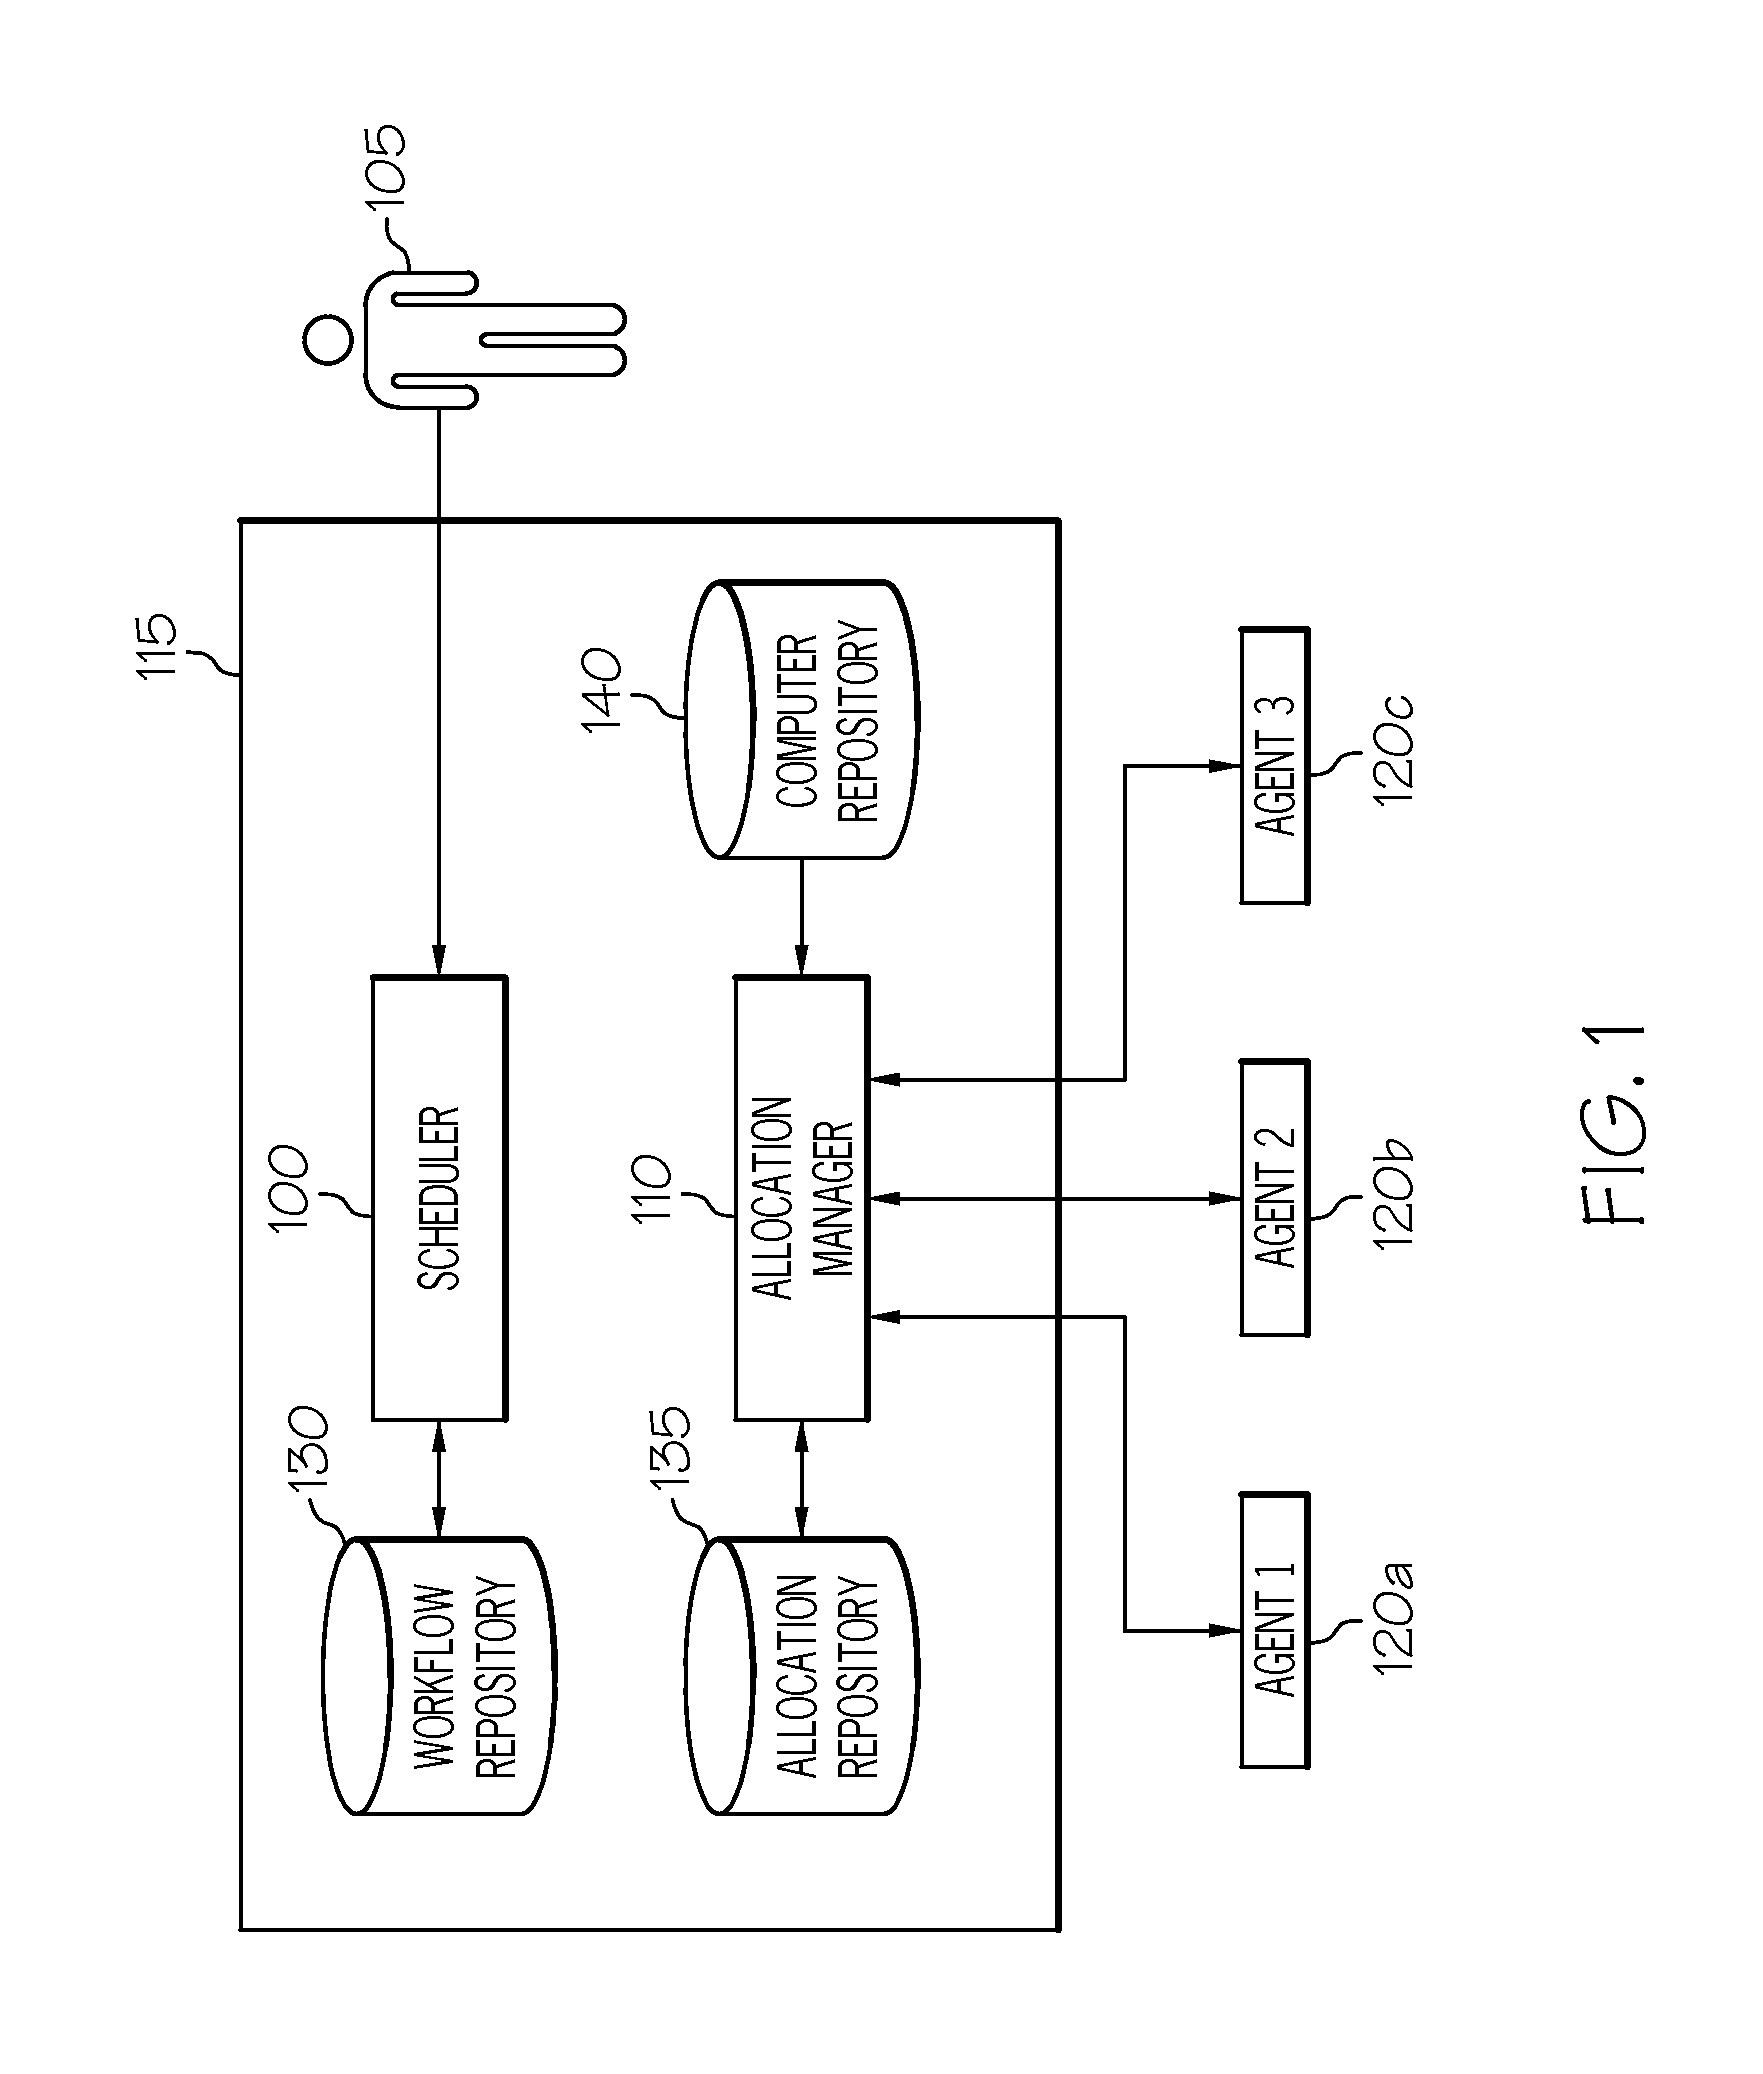 Method and system to automatically optimize execution of jobs when dispatching them over a network of computers